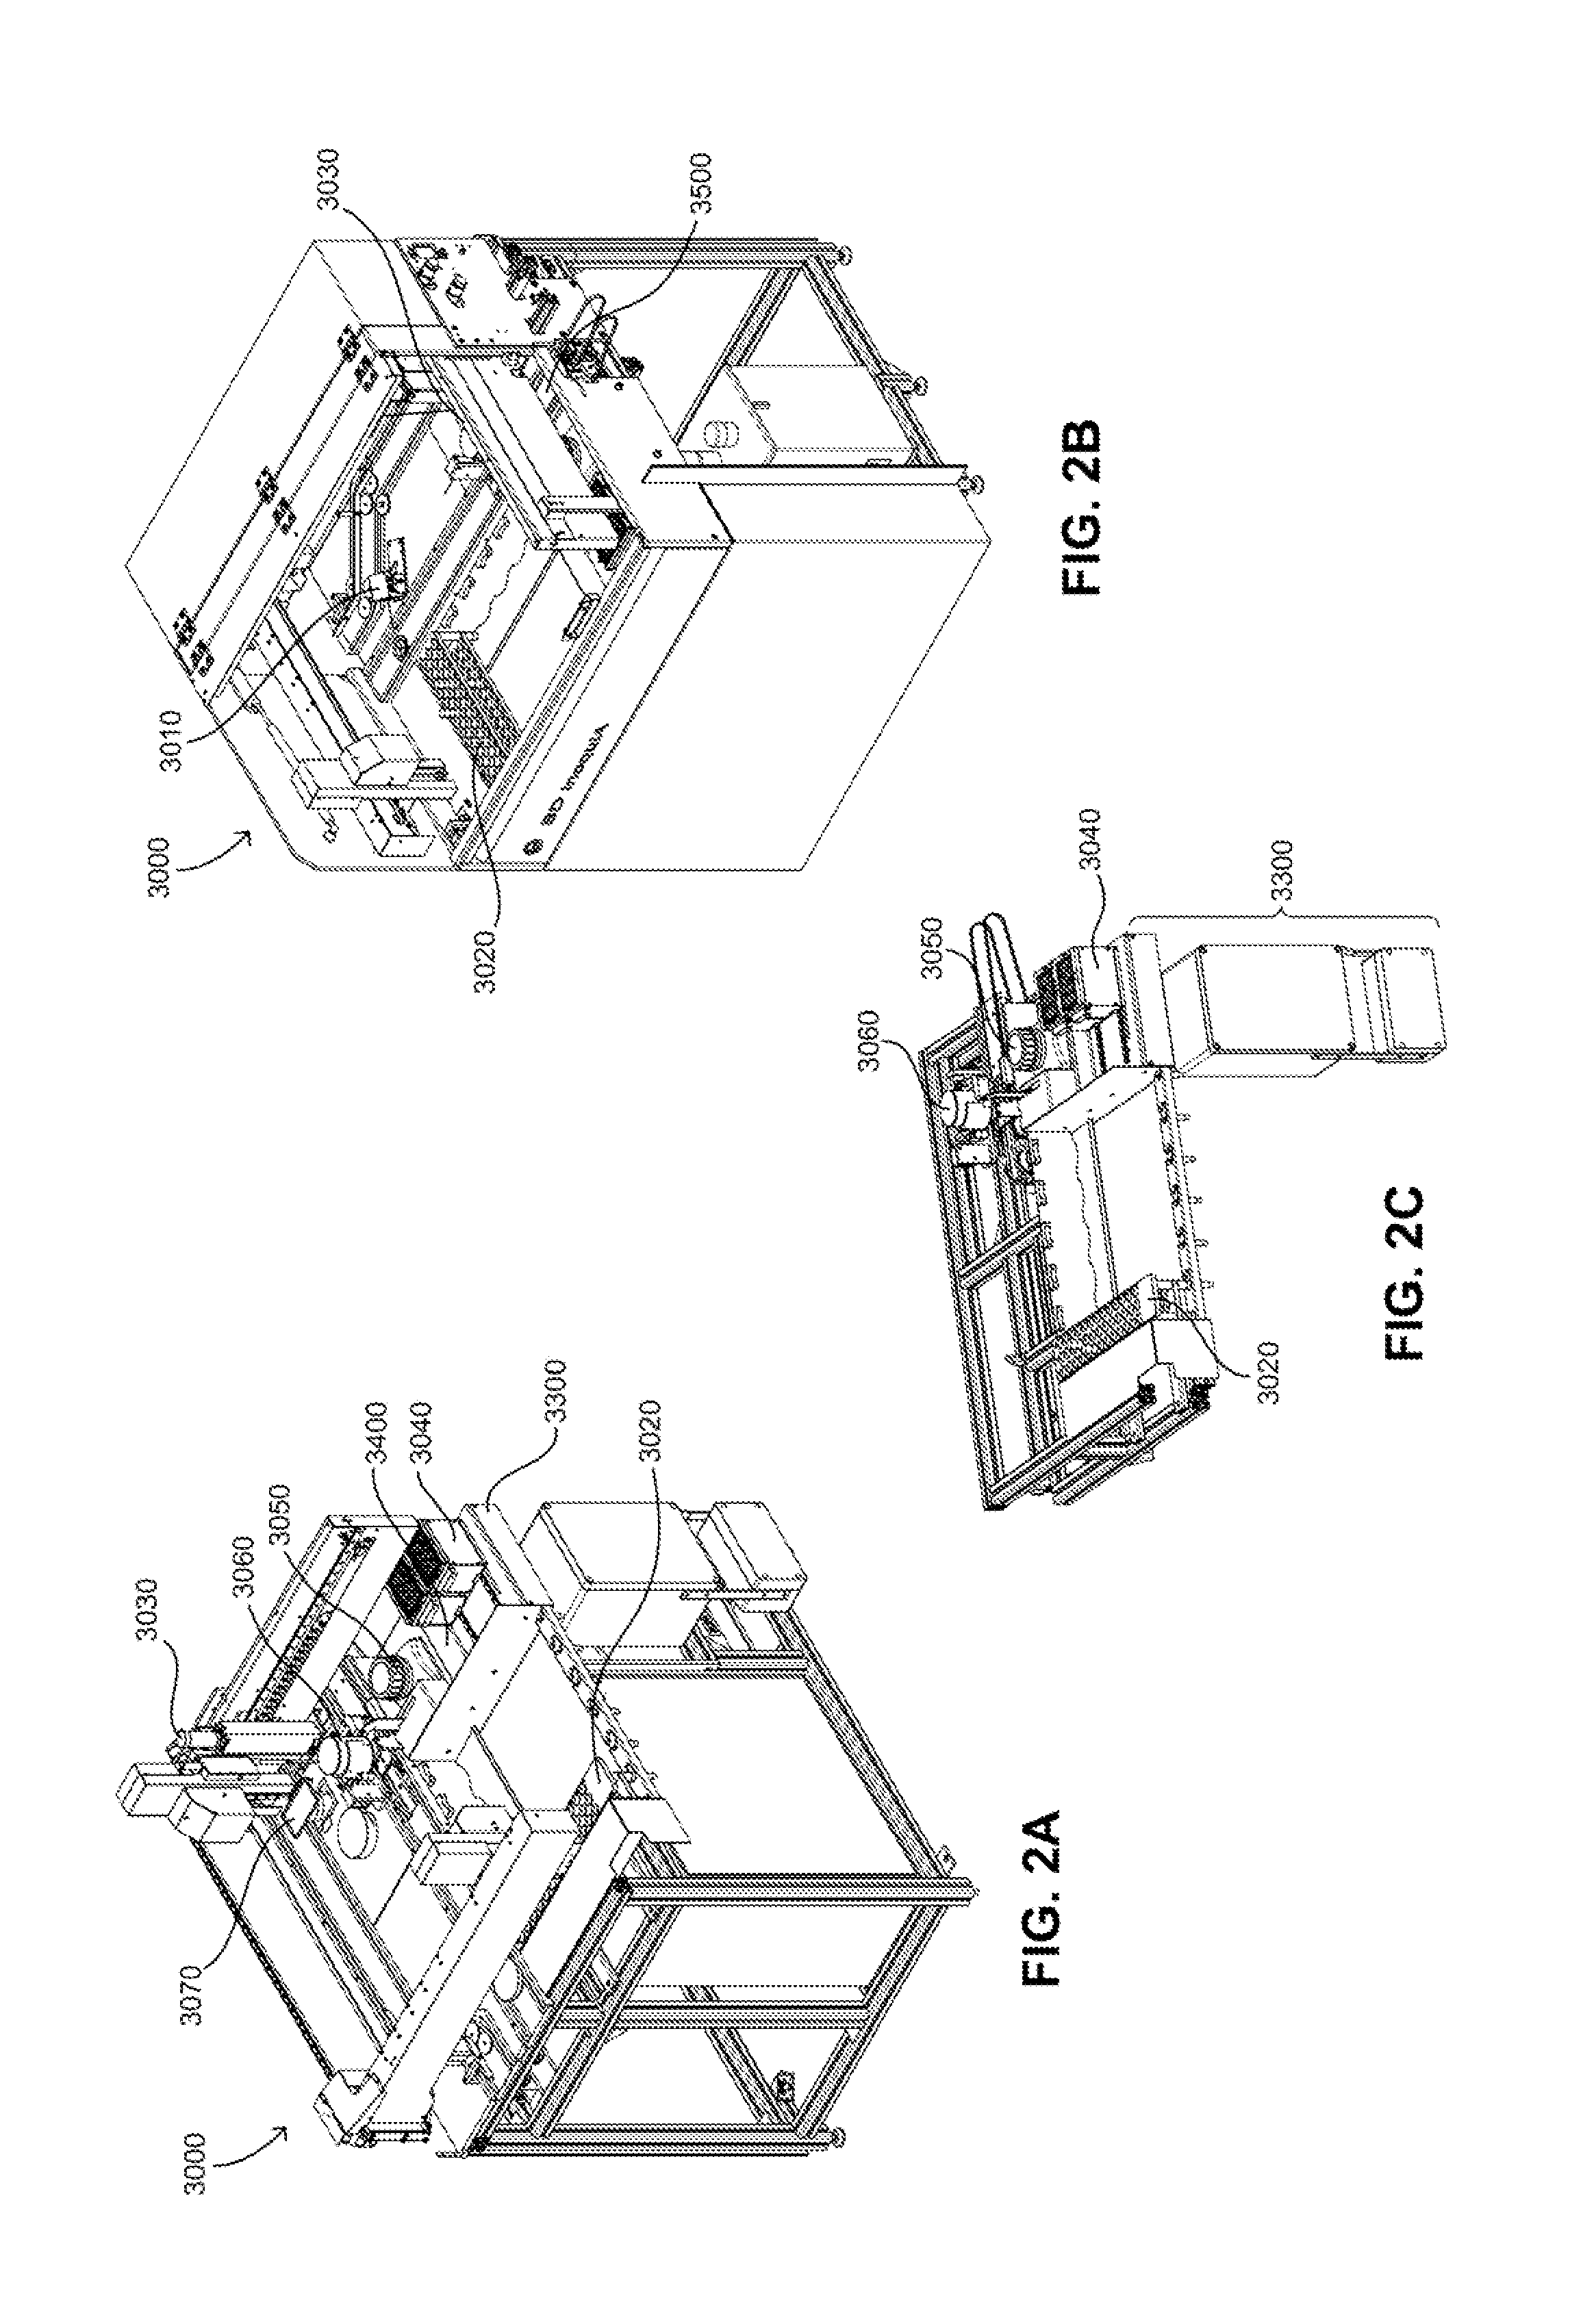 System and method for the automated preparation of biological samples